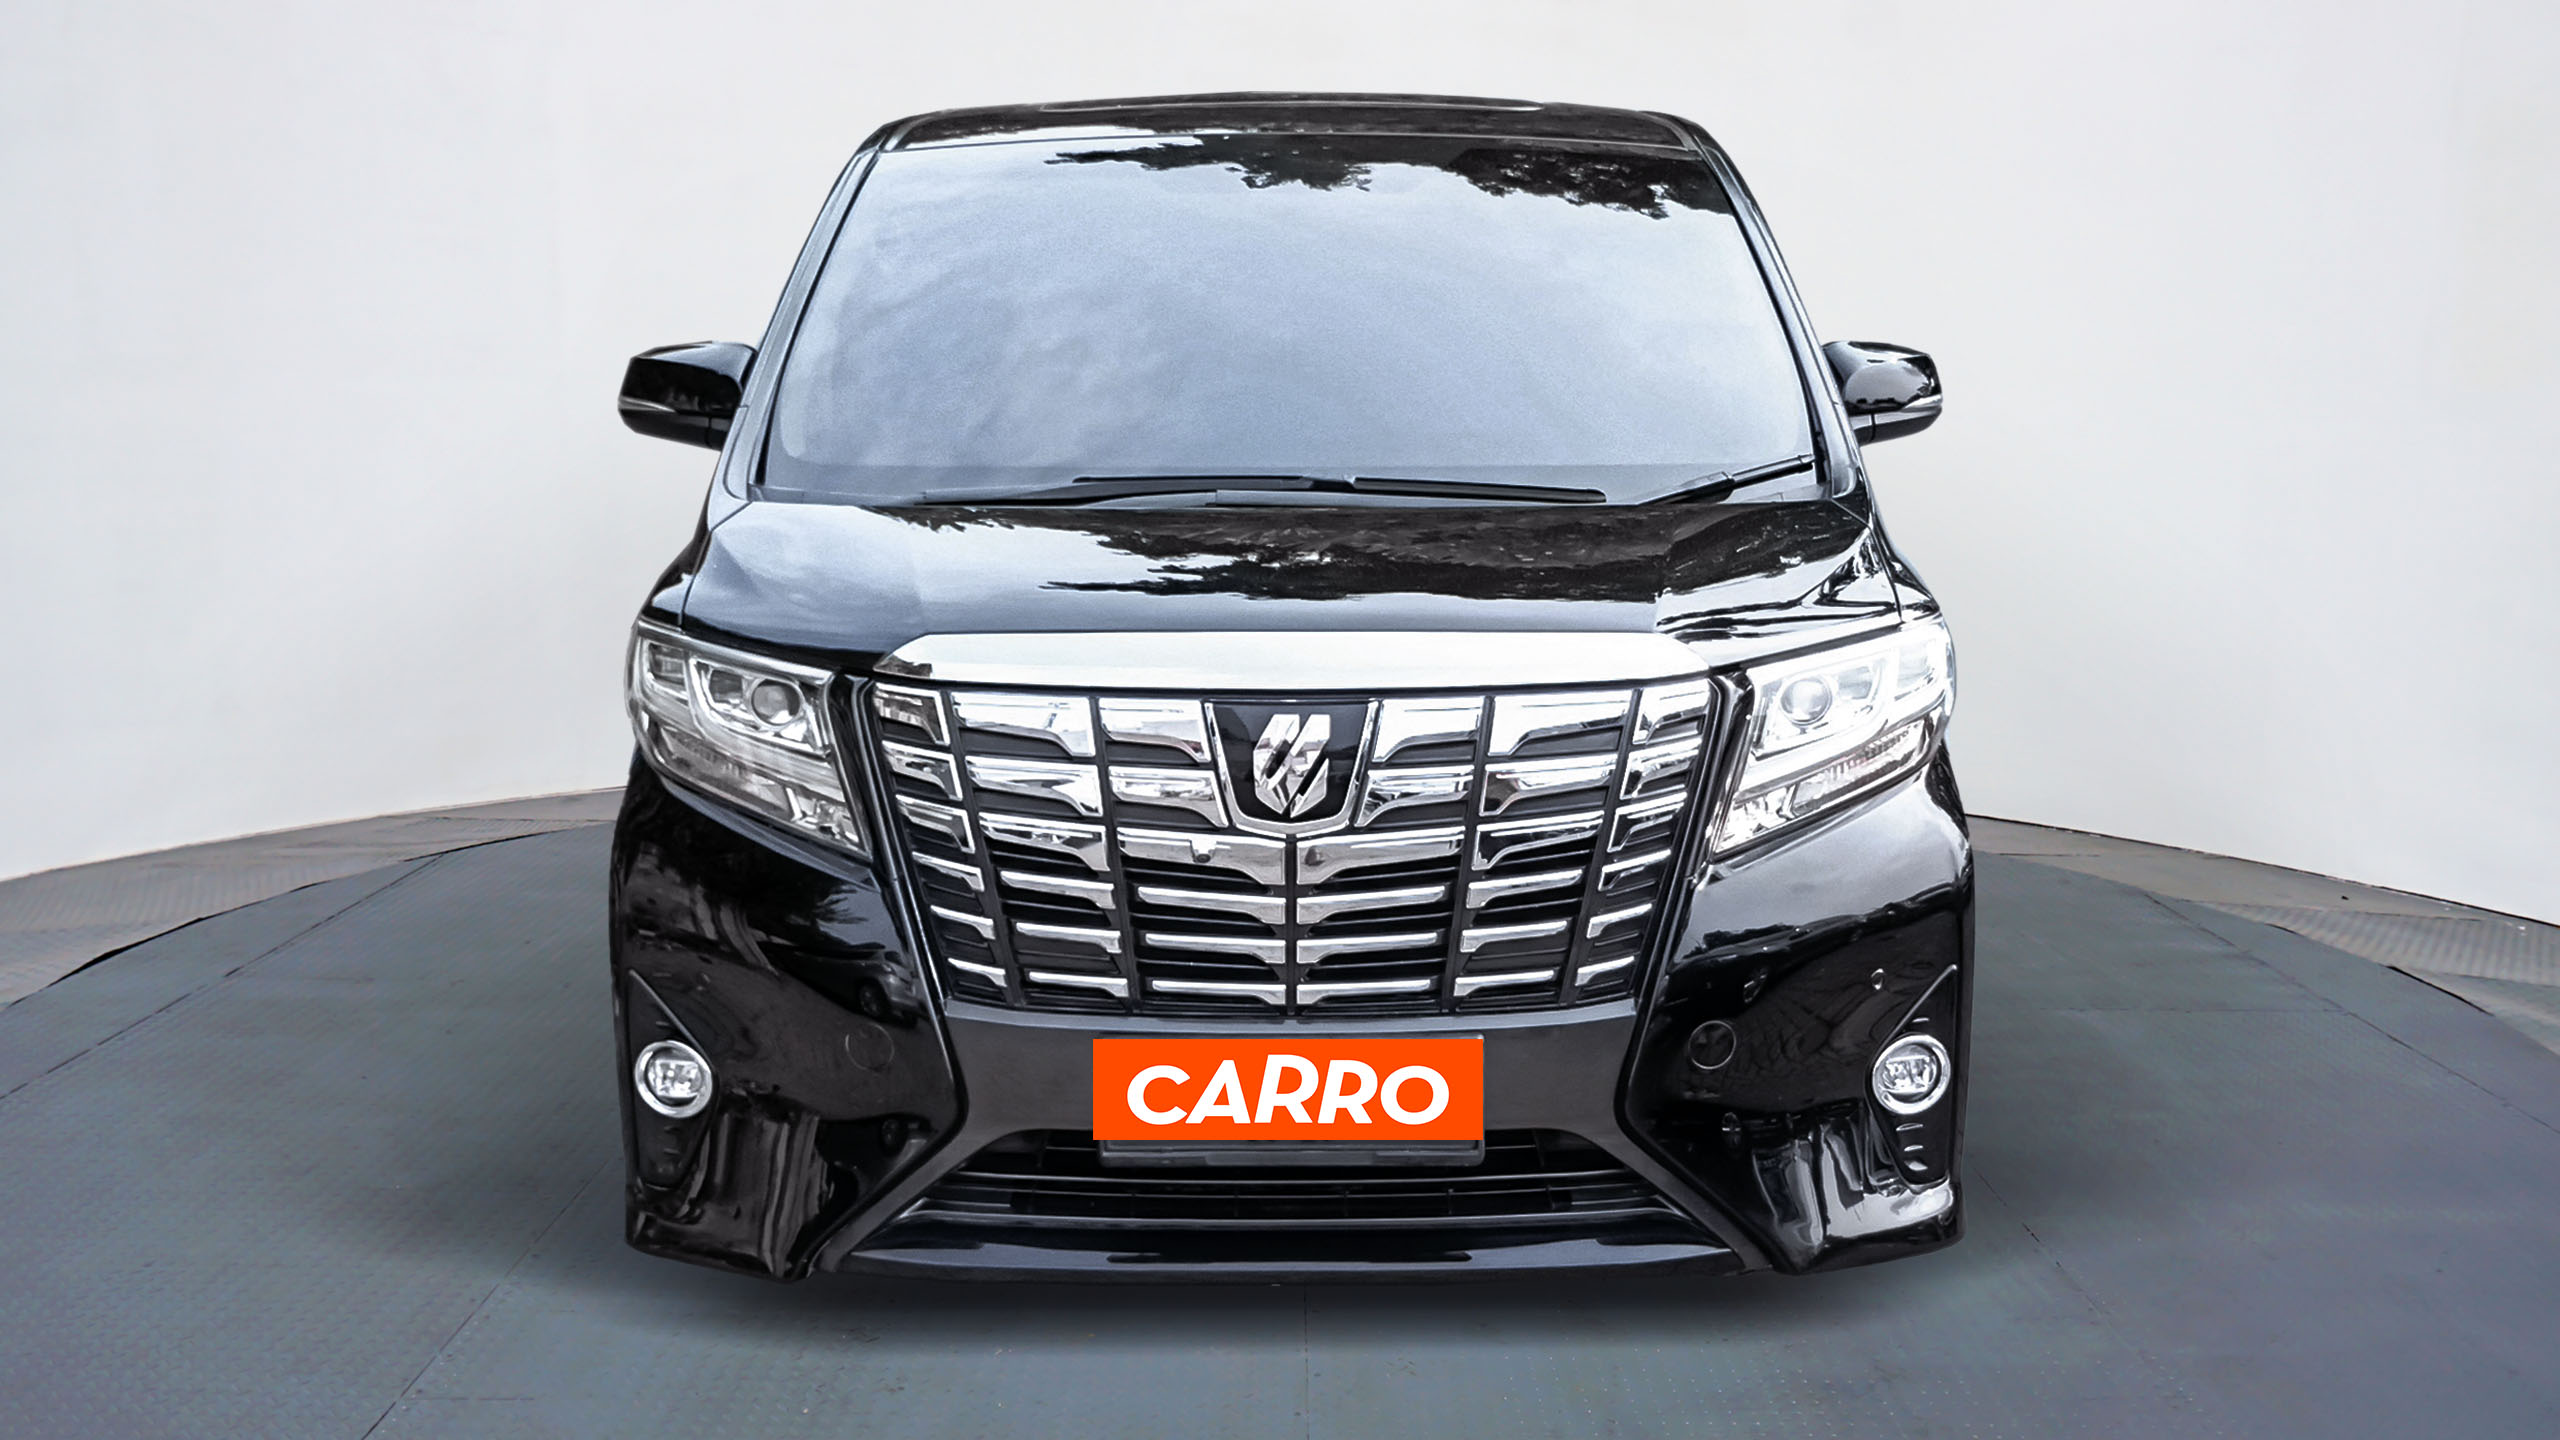 Used 2015 Toyota Alphard 2.5 G A/T 2.5 G A/T